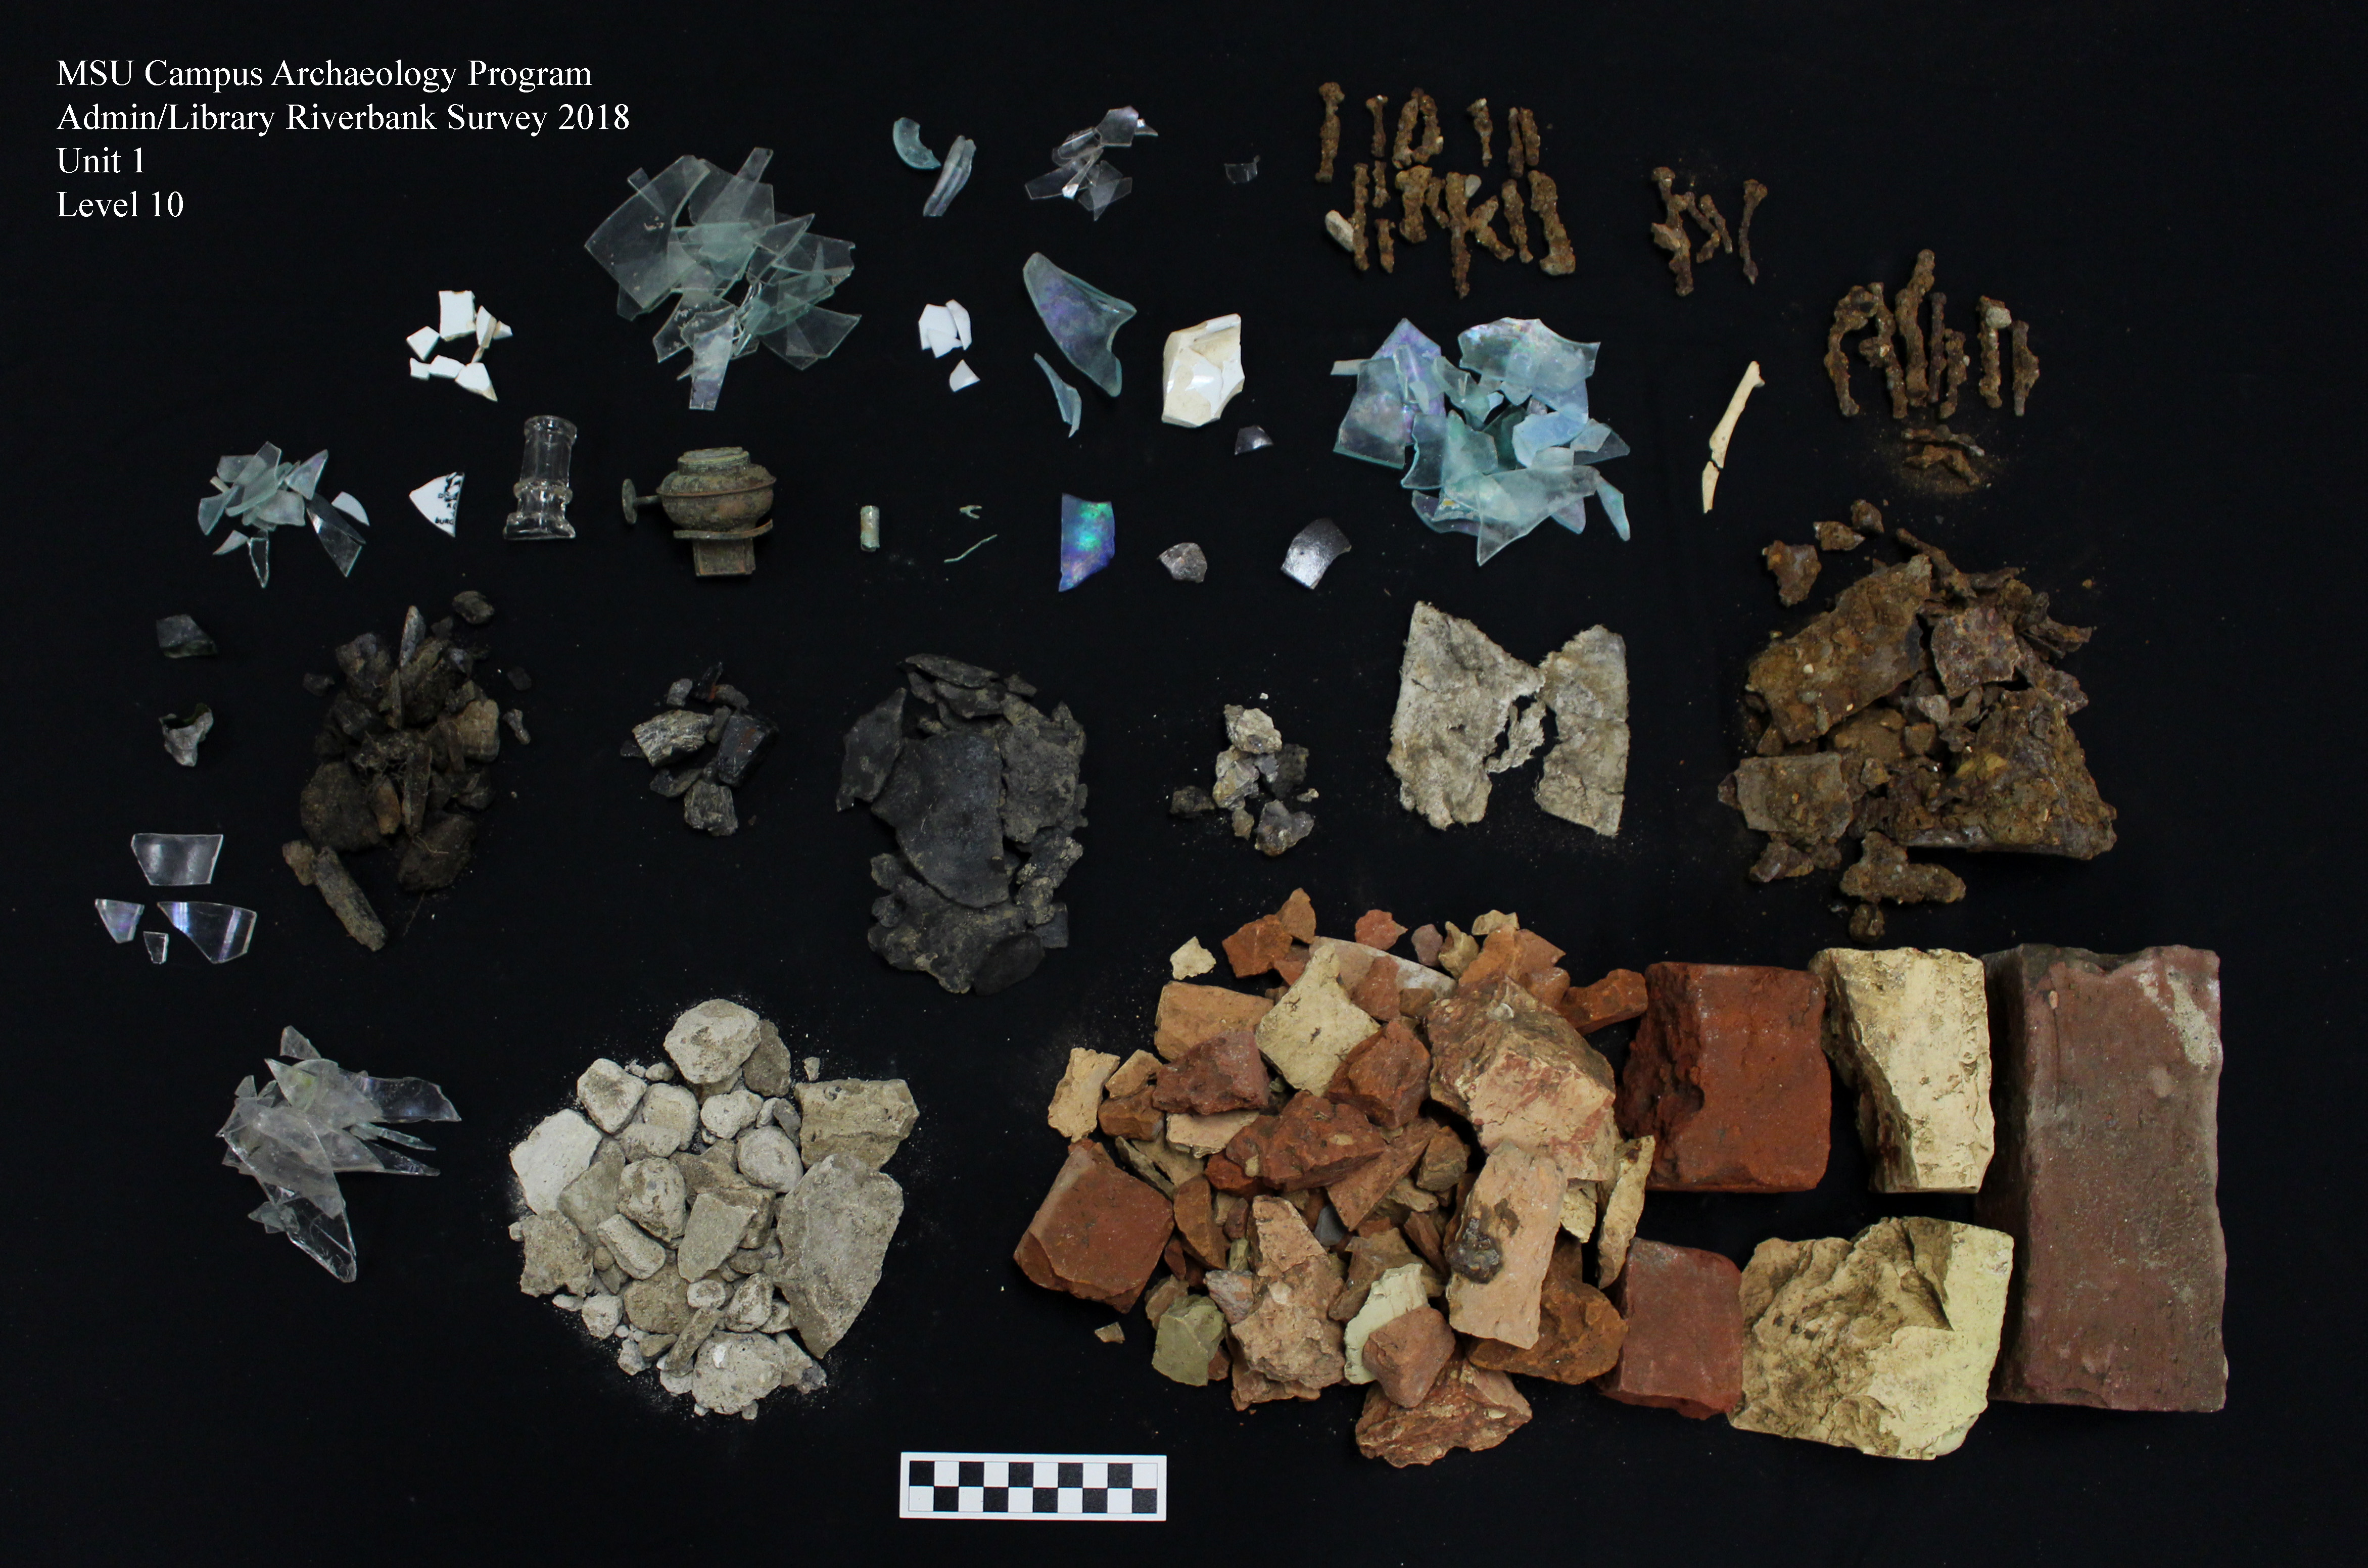 Over twenty piles of different artifact types, including brick fragments, glass bottle shards, and nails